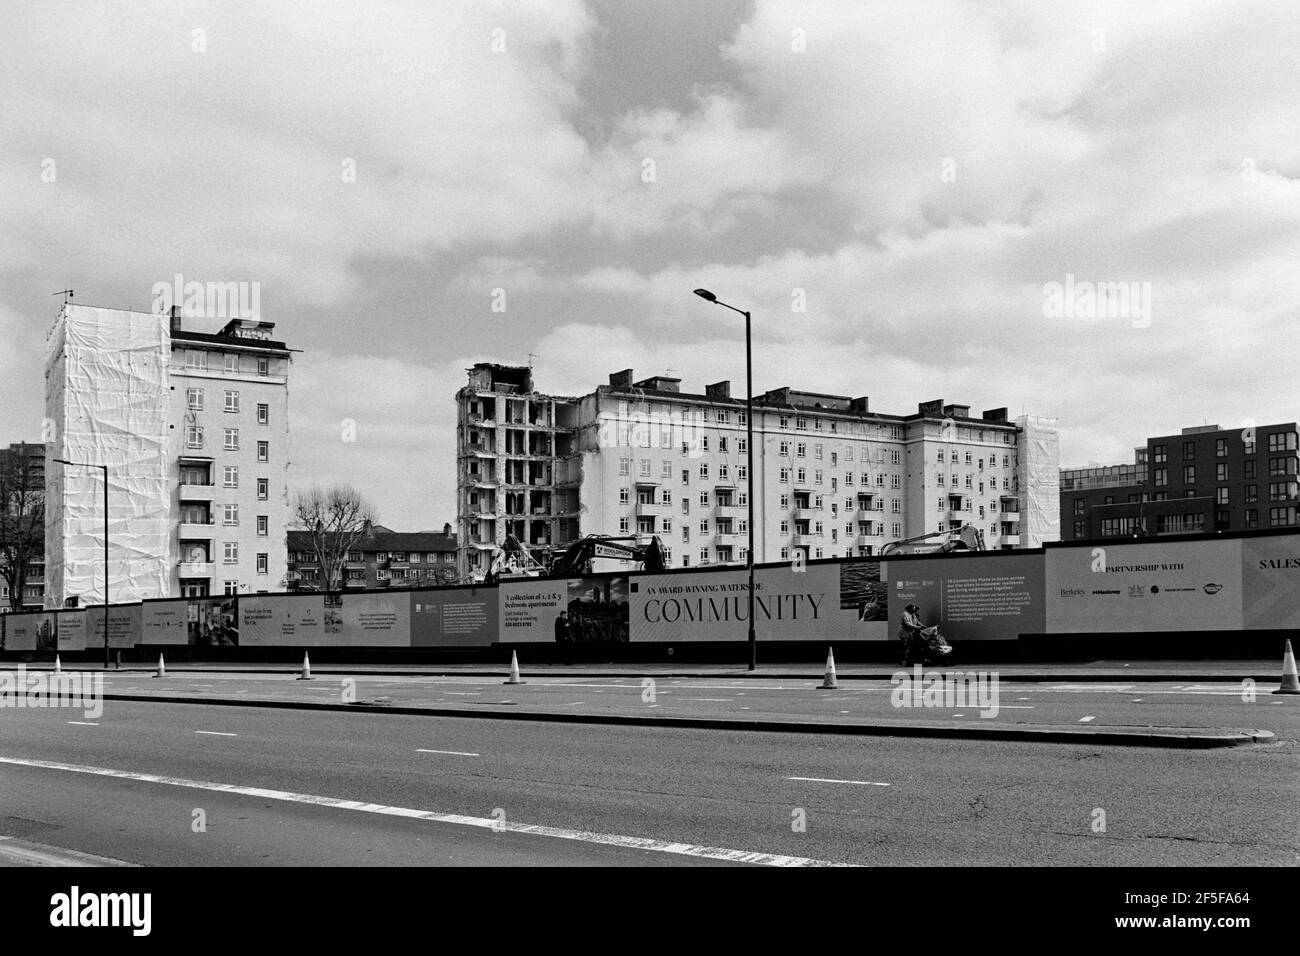 Ashdale House under demolition on the Woodberry Down Estate, North London UK, during phase 3 of redevelopment of the area by Berkeley Homes, in 2021 Stock Photo